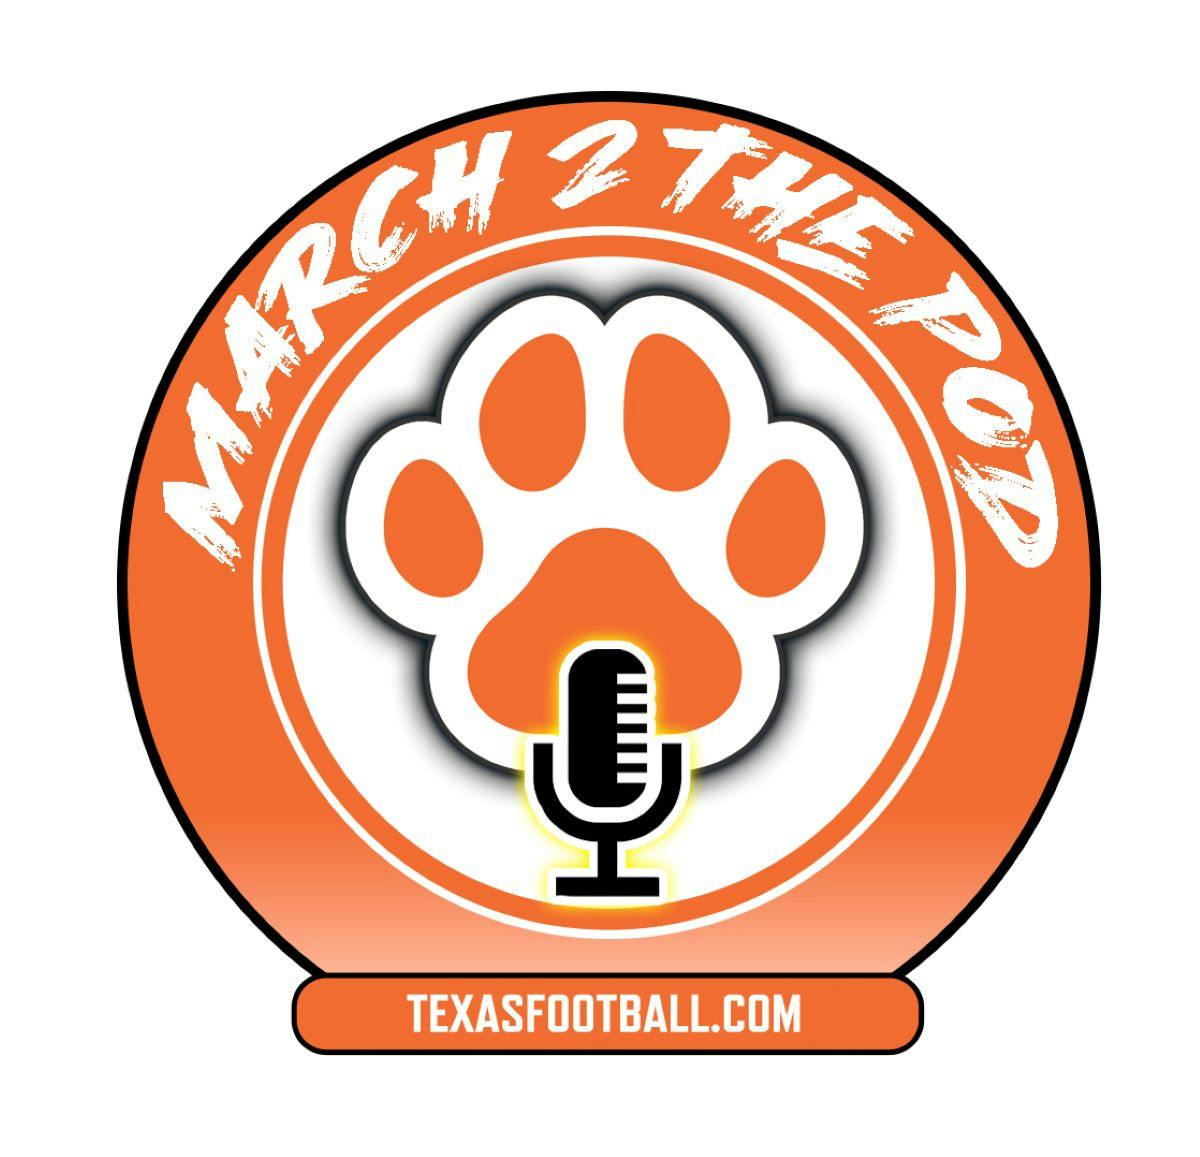 MARCH 2 THE POD: Who's playing worse baseball, Astros or Kats?